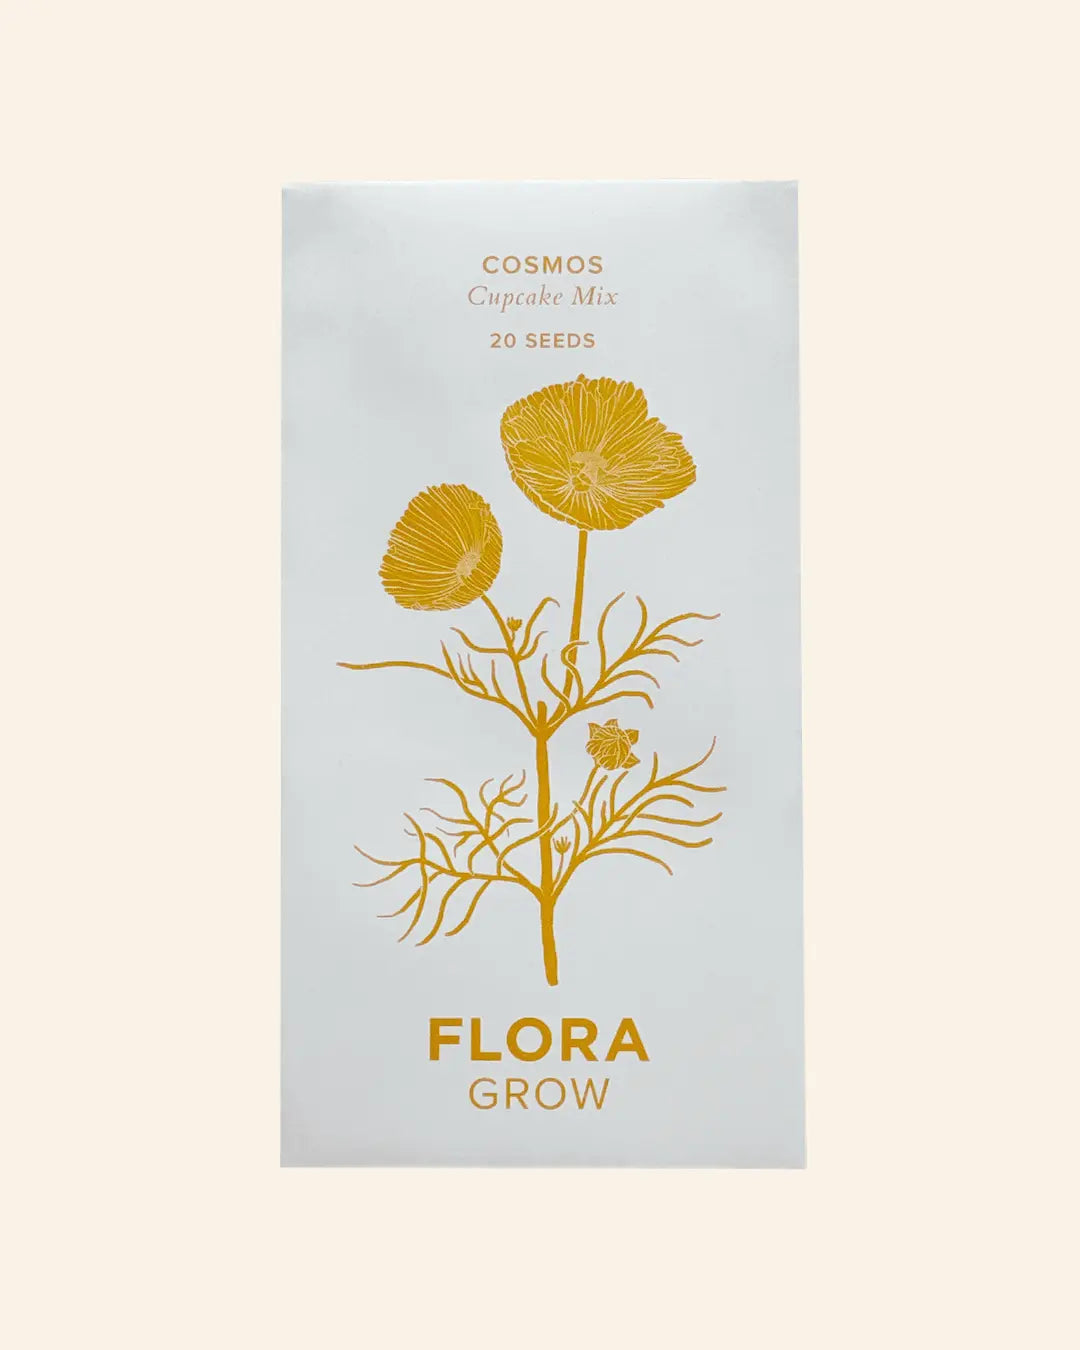 Cozmos Cupcake Mix Seed Pack by Flora Grow